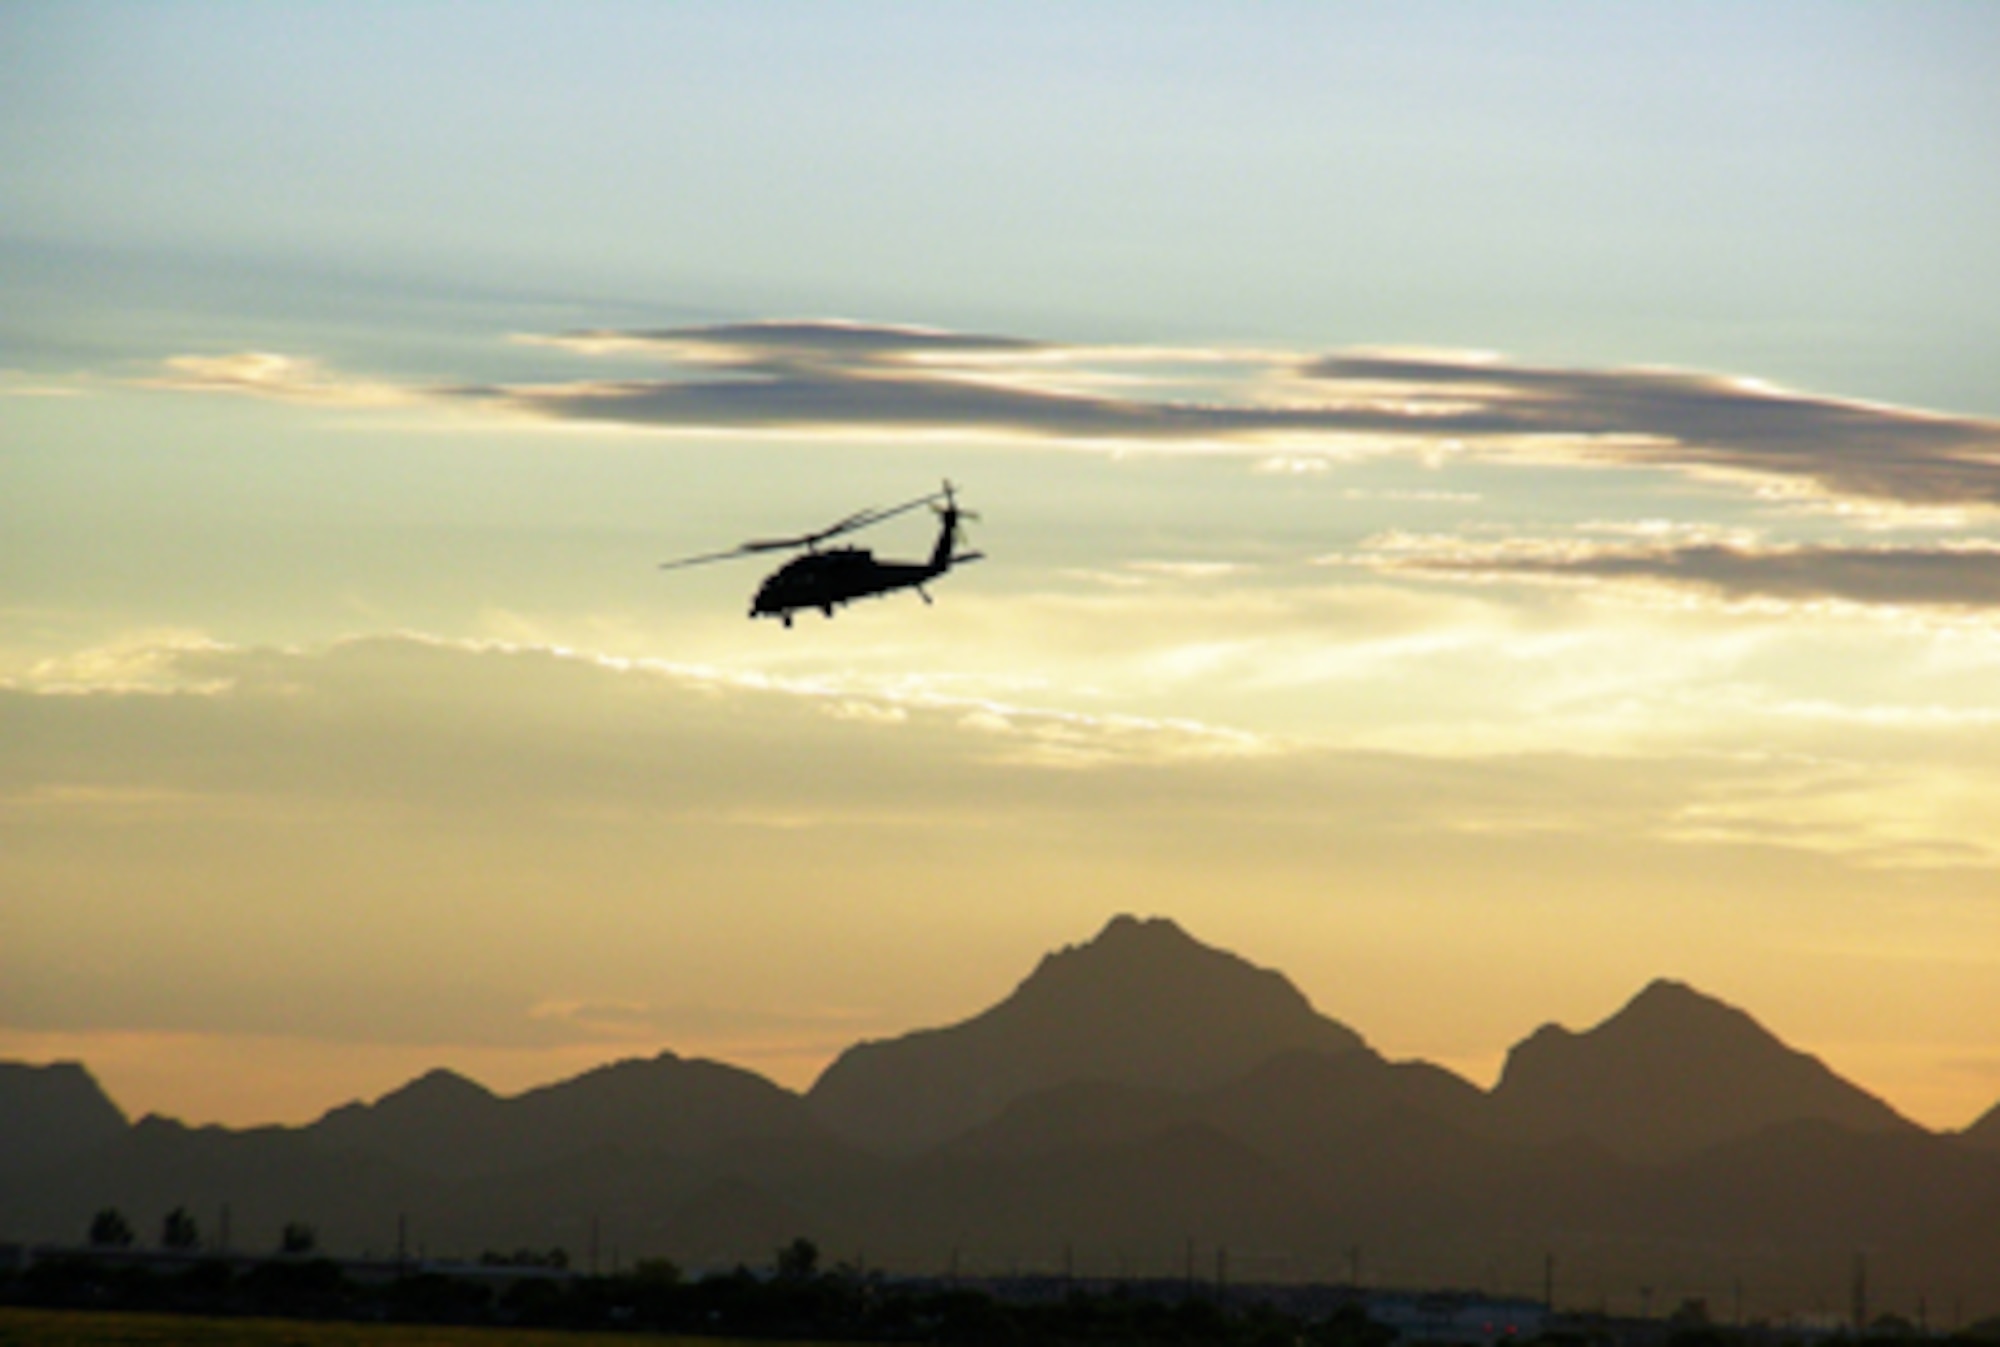 A 920th Rescue Wing HH-60G Pave Hawk helicopter pierces the desert sky over the southern-Arizona mountains as part of two-weeks of high-altitude training as pilots and aircrews from the 920th Rescue Wing here trained July 12 through 25, 2008, at Davis-Monthan Air Force Base, Ariz. Members of the 943rd Rescue Group here responded to a Department of Public Safety helicopter crash recently. As an Air Force Reserve Command unit, the 943rd RQG is currently under the control of the 920th Rescue Wing, Patrick Air Force Base, FL., and is the only Reserve rescue unit in the Southwestern United States. (U.S. Air Force photo/Capt. Cathleen Snow)